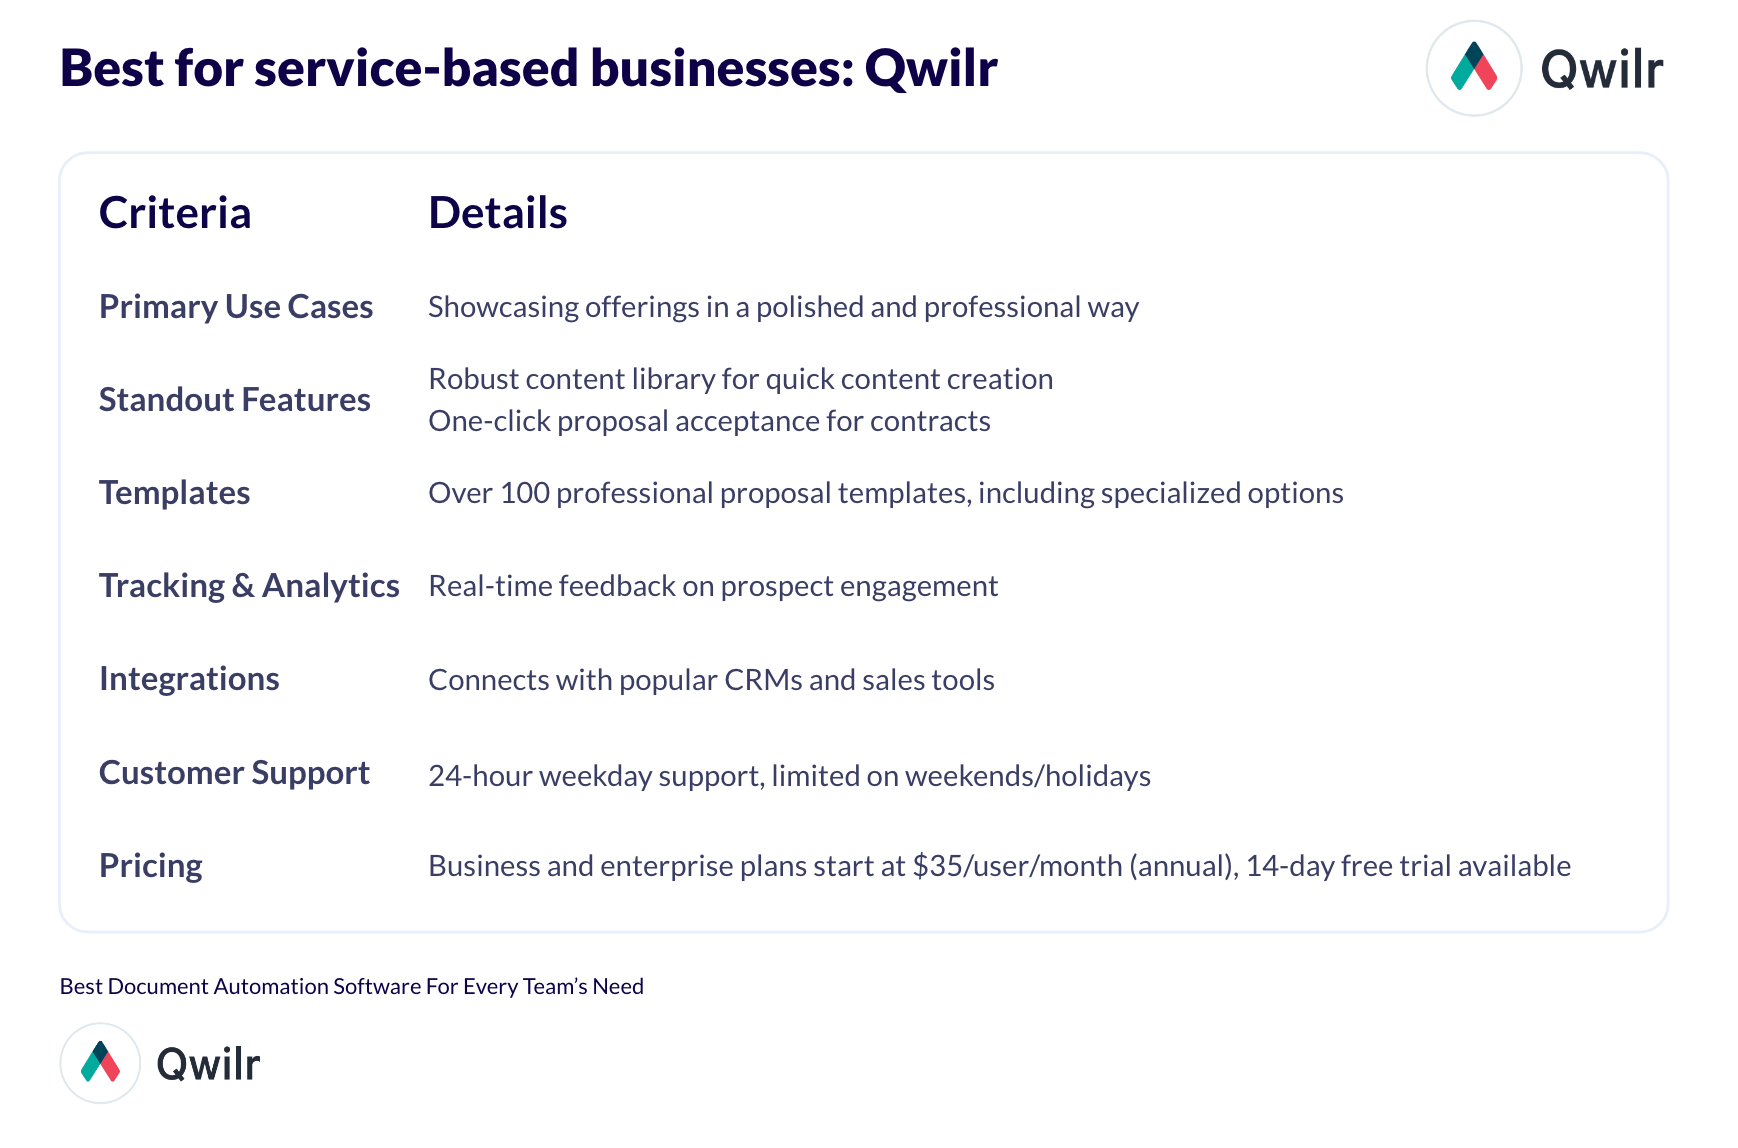 Best for service-based businesses: Qwilr